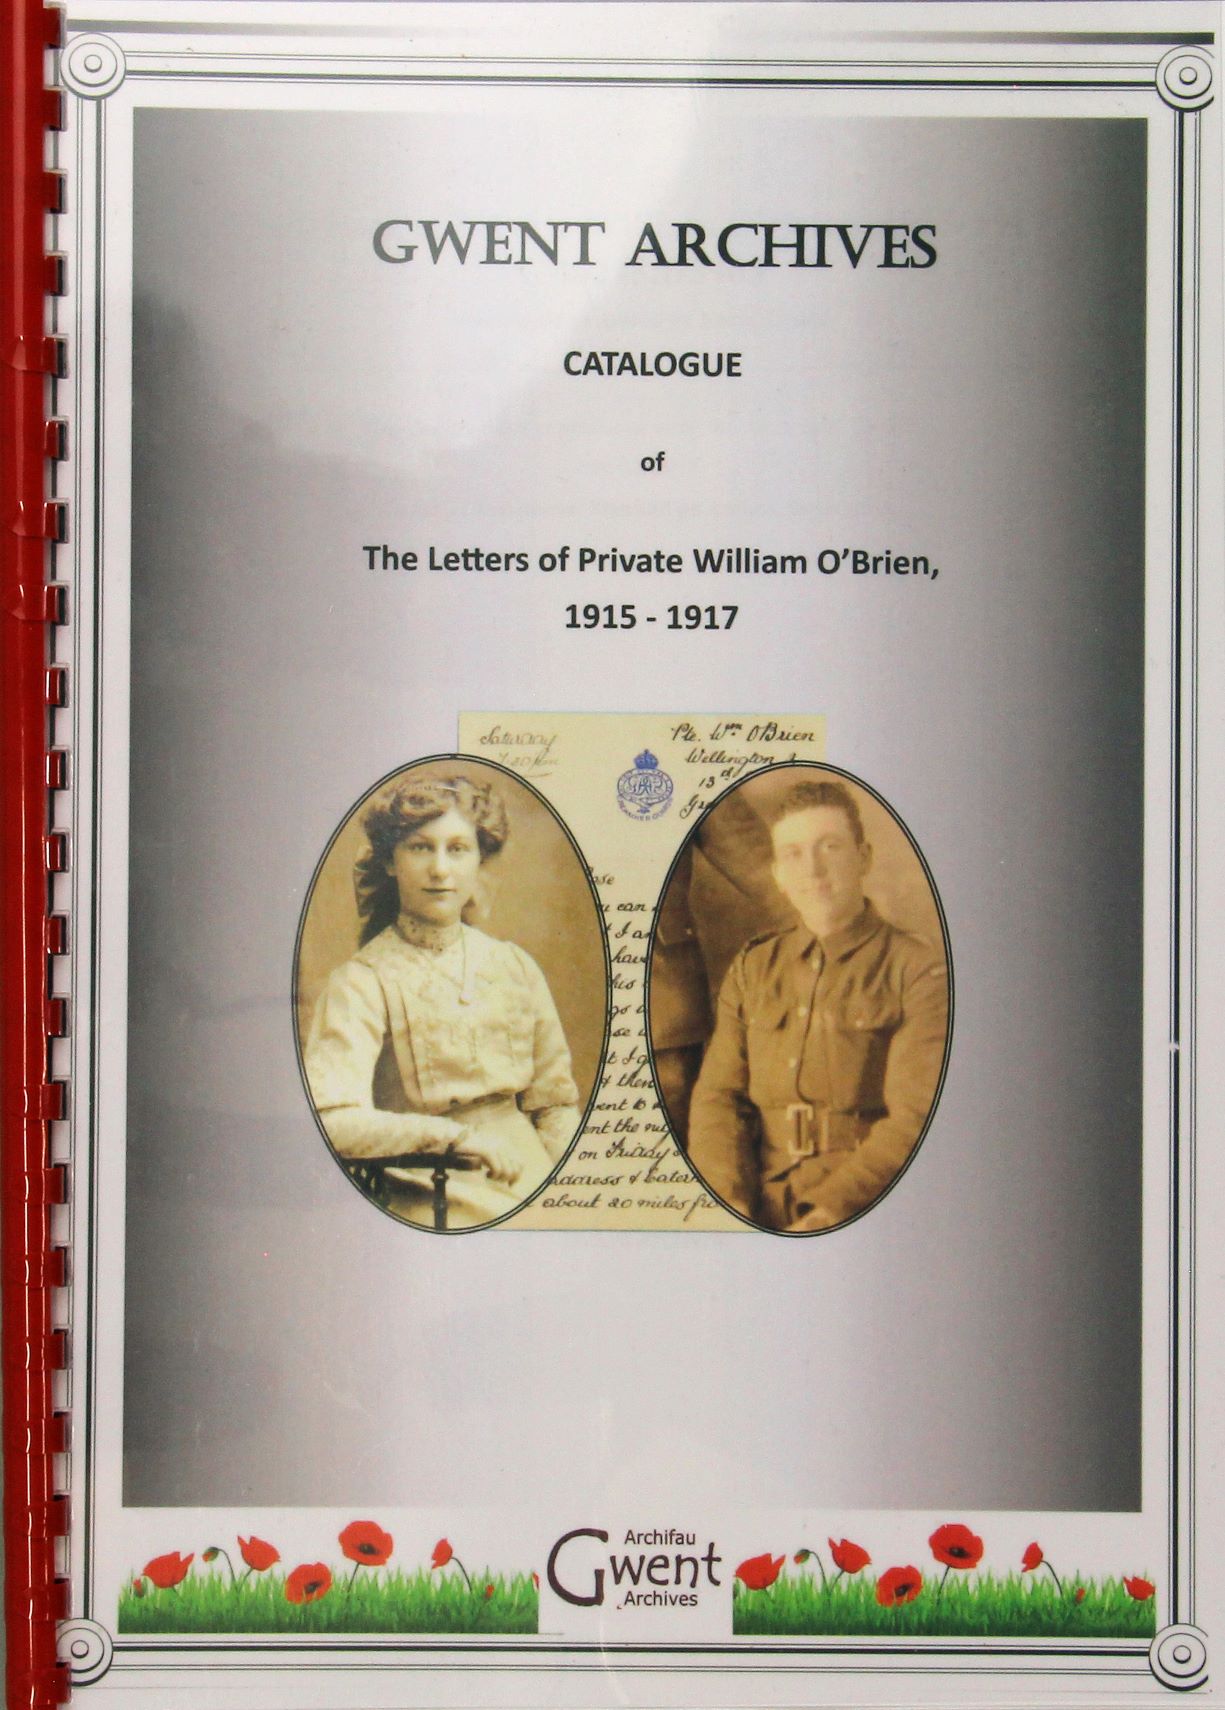 Catalogue of the Letters of Private William O'Brien 1915-1917, Gwent Archives, £2.00